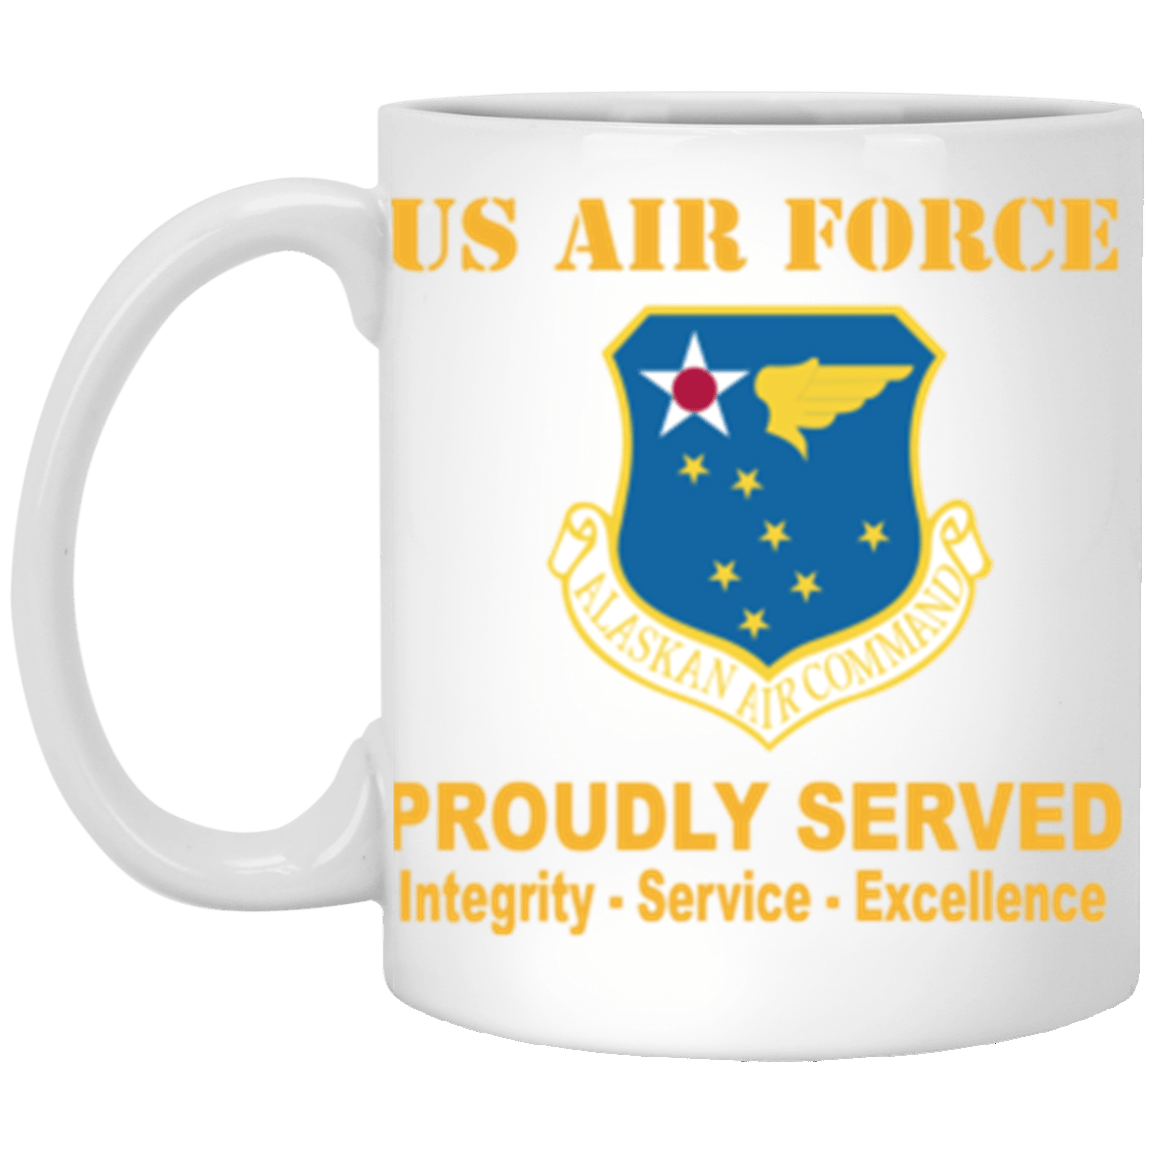 US Air Force Alaskan Air Command Proudly Served Core Values 11 oz. White Mug-Drinkware-Veterans Nation